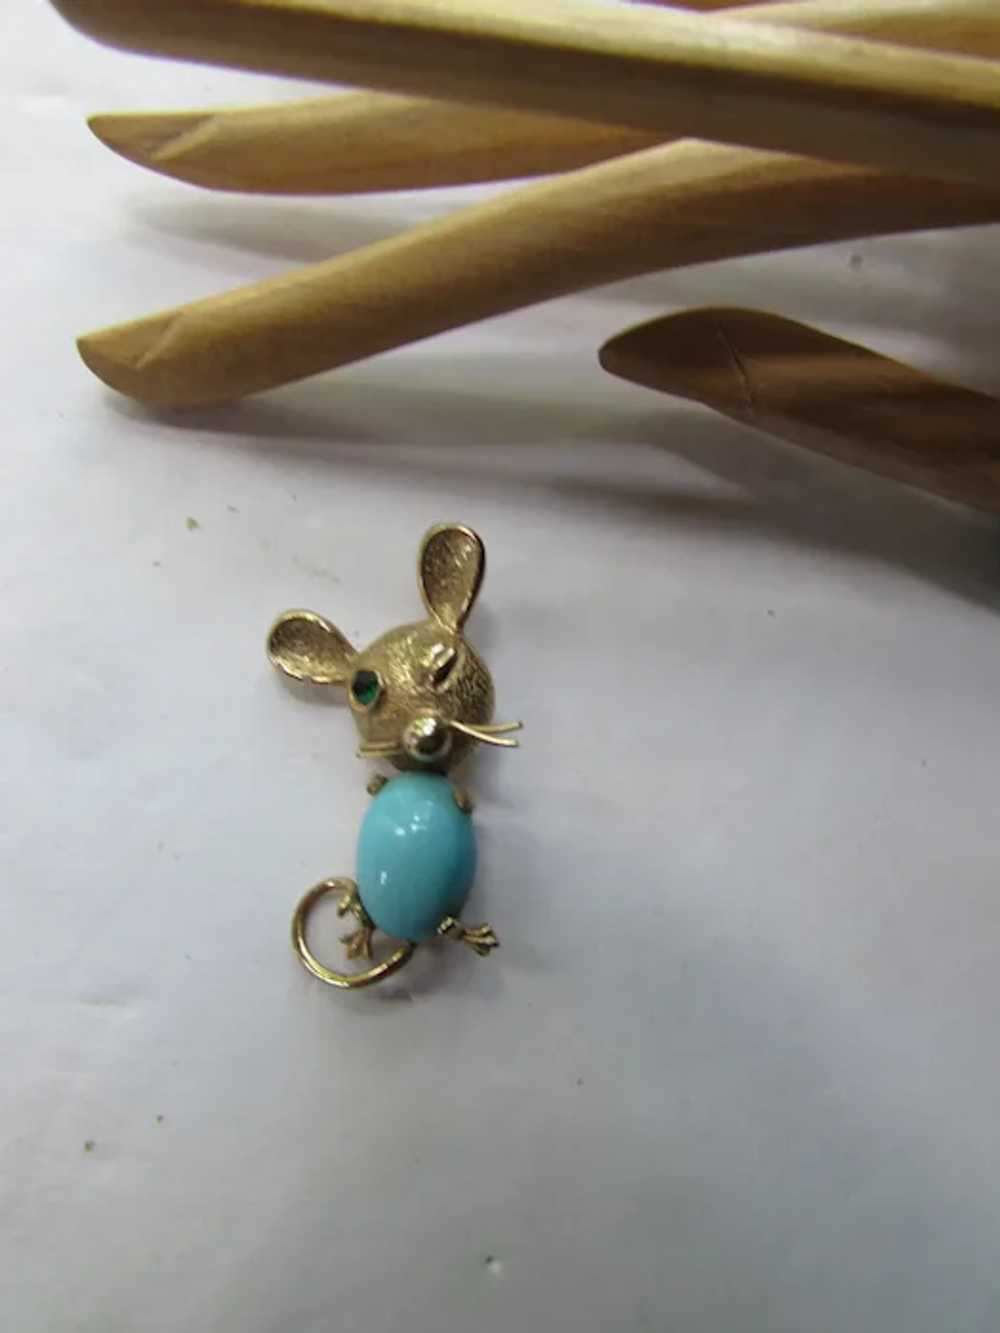 Whimsical Castlecliff Winking Mouse Brooch - image 3